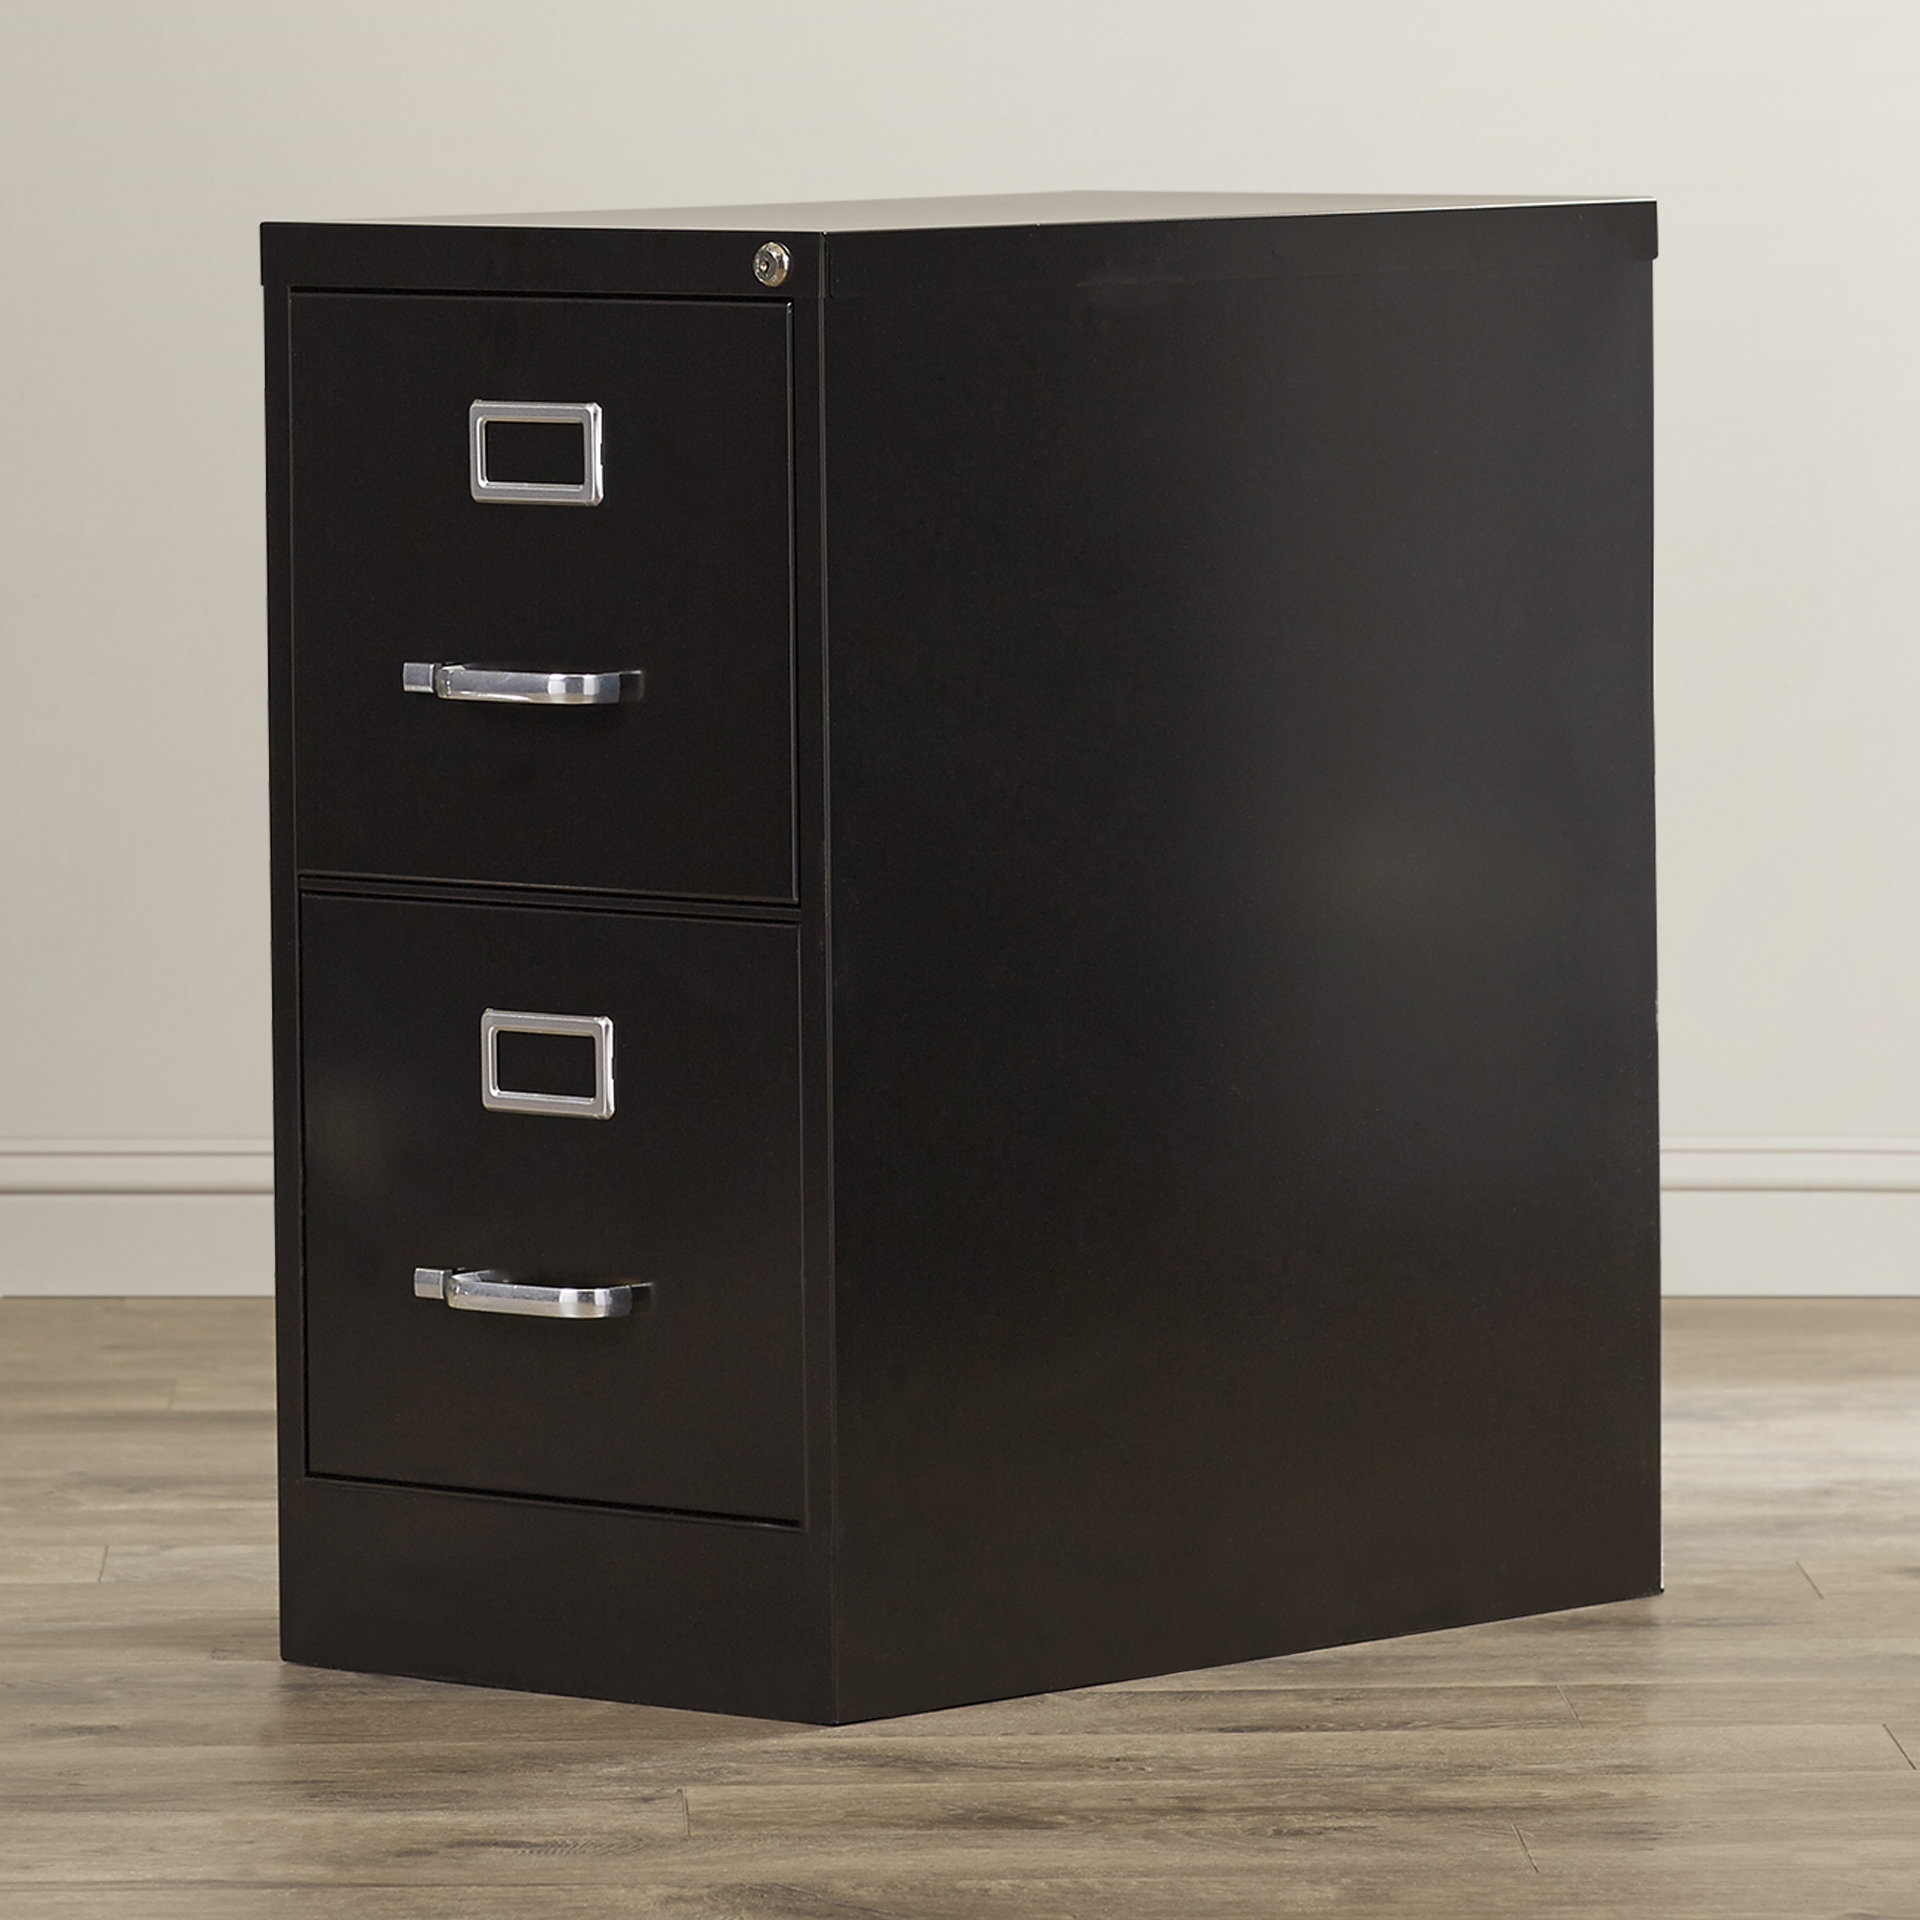 Symple Stuff 2 Drawer Vertical Filing Cabinet Reviews Wayfair in proportions 1920 X 1920